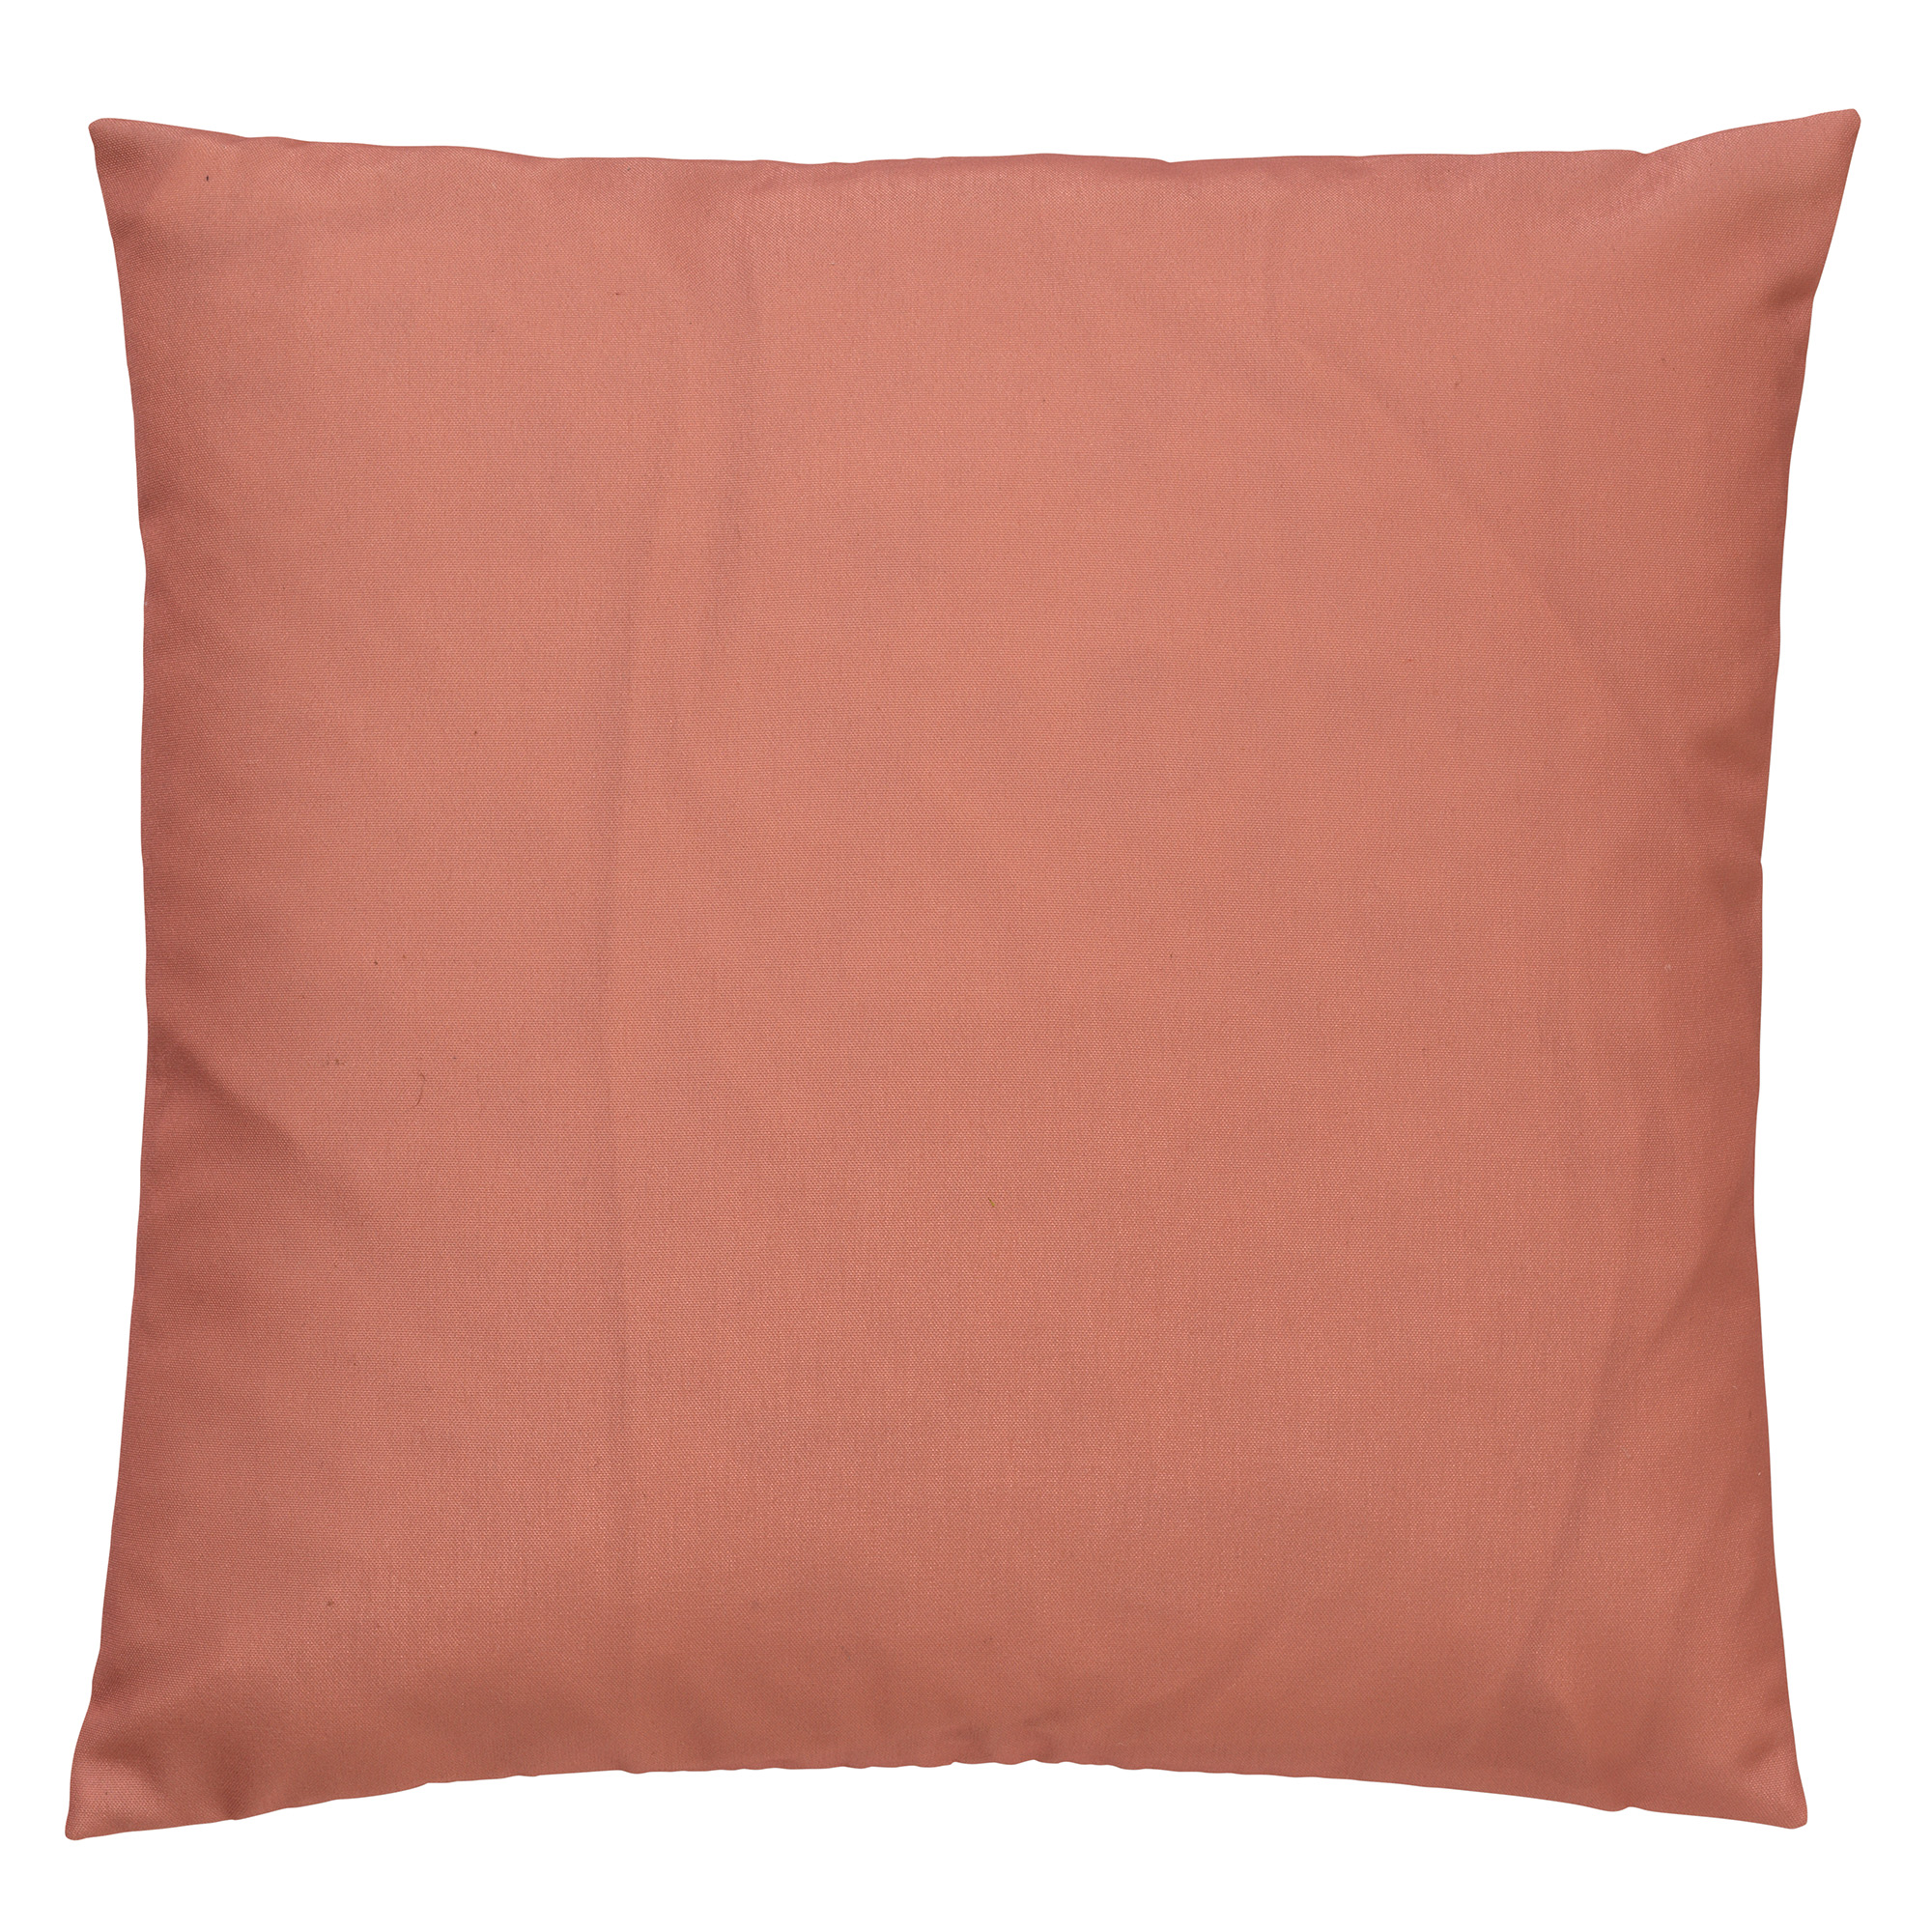 Cushion Santorini 45x45 cm Muted Clay - water-repellent and UV-resistant